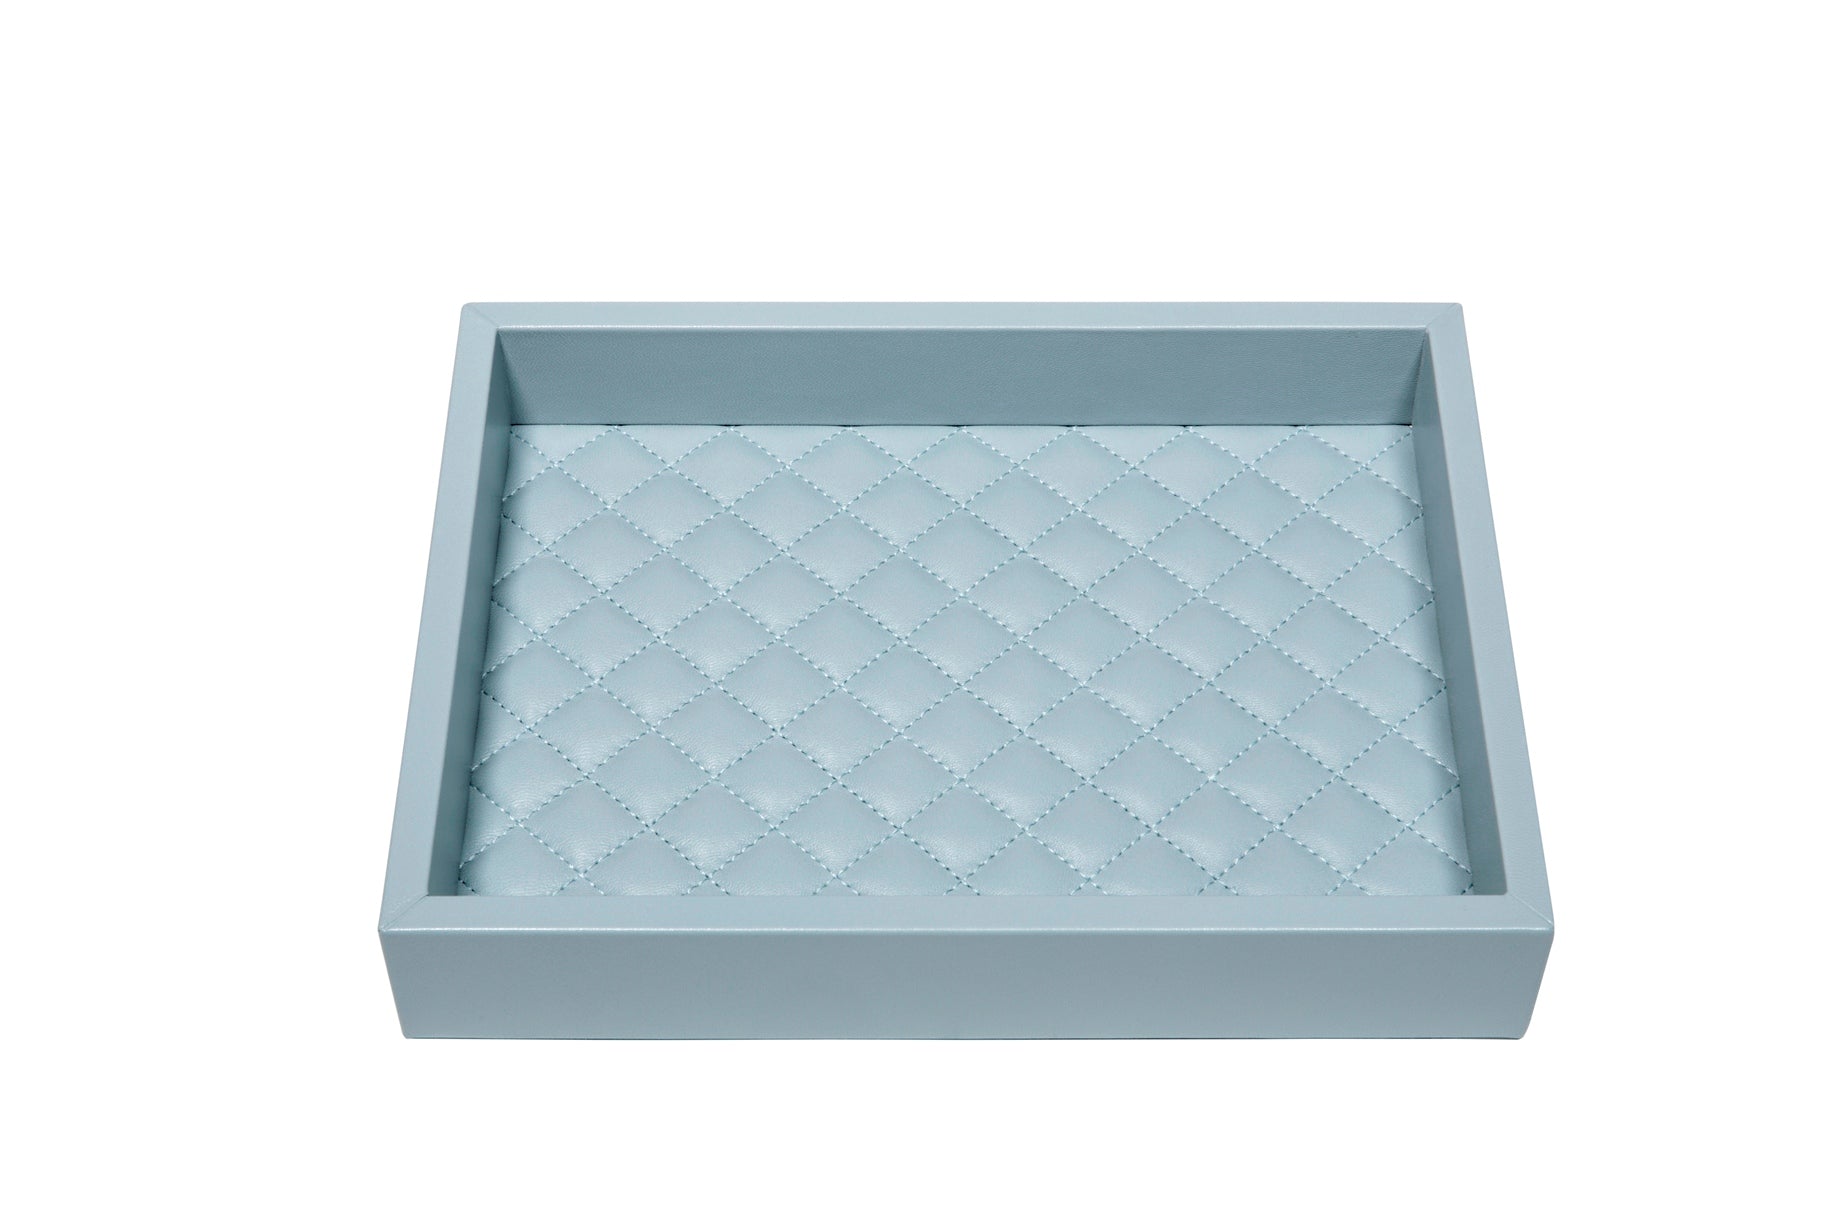 Riviere Febe Diamonds Rectangular Valet Tray | Leather Tray | Quilted Diamonds Padded Lining | Perfect for Yacht Decor | Available at 2Jour Concierge, #1 luxury high-end gift & lifestyle shop